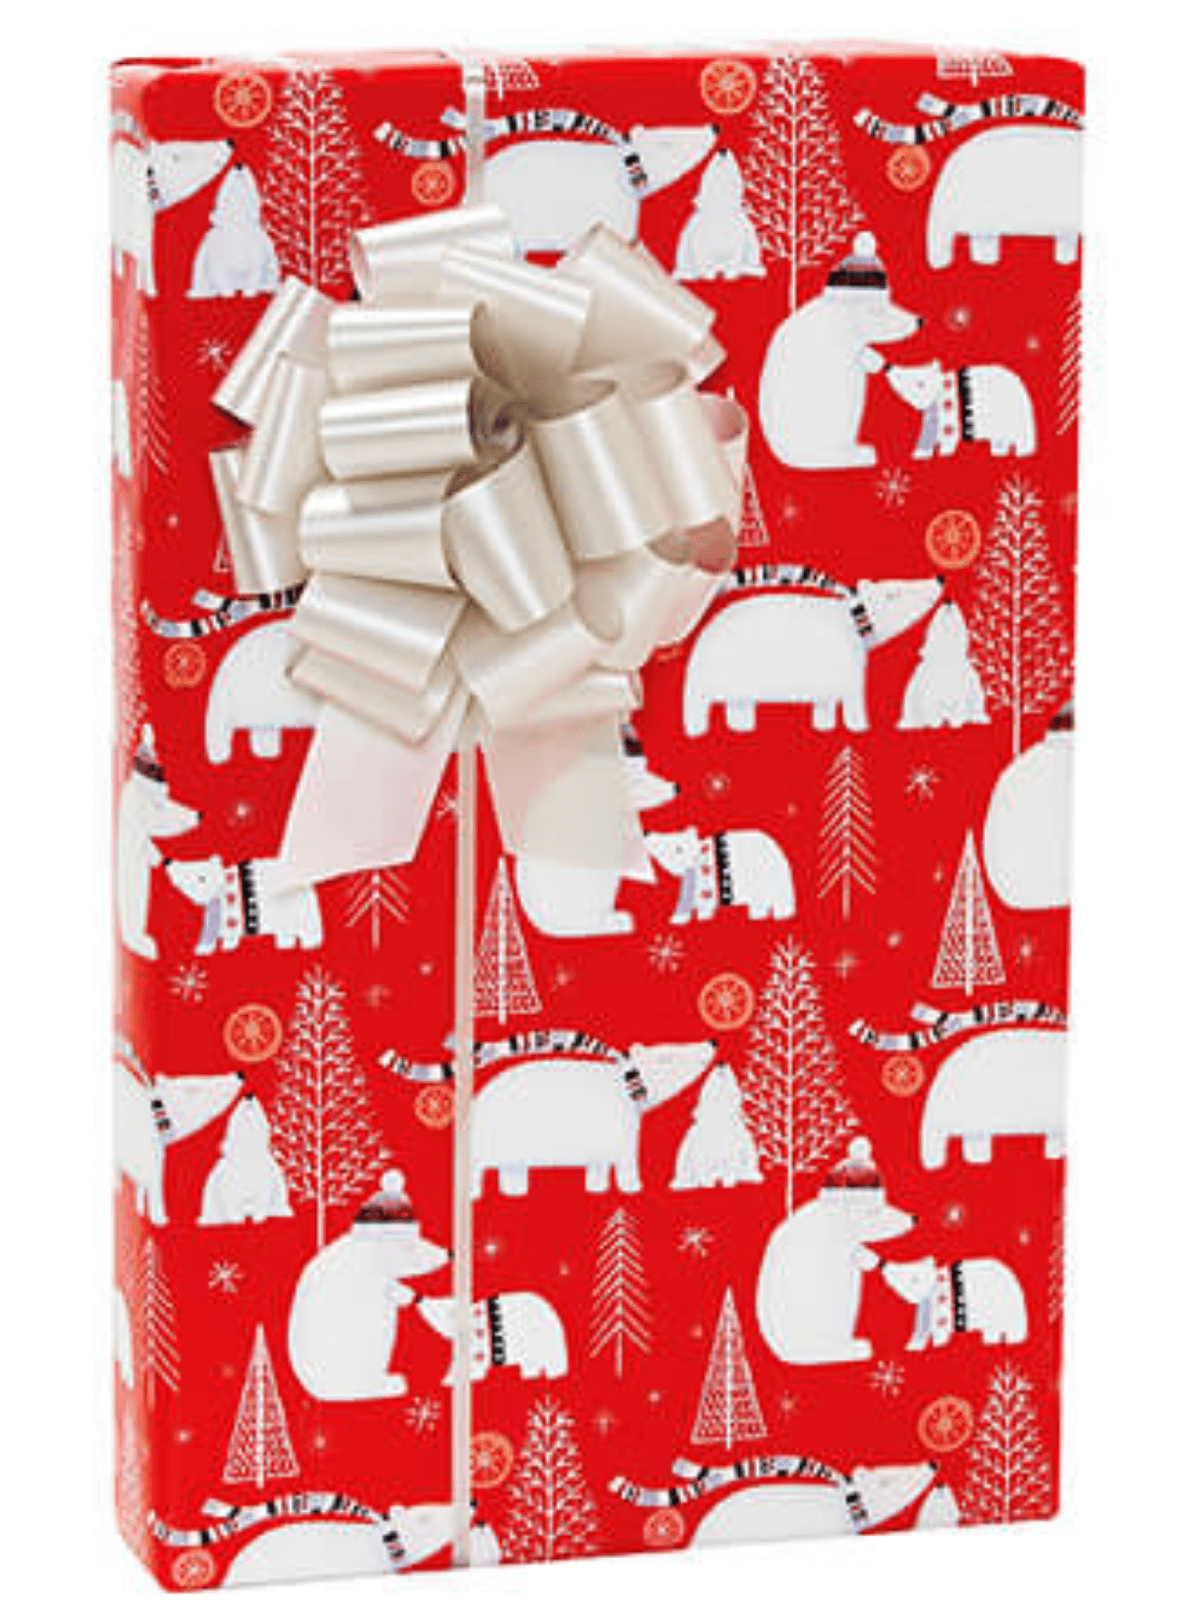  RUSPEPA Christmas Wrapping Paper, Jumbo Roll Kraft Paper -  Polar Bear and Penguin Design for Holiday Gift Wrap - 24 Inches x 100 Feet  : Health & Household